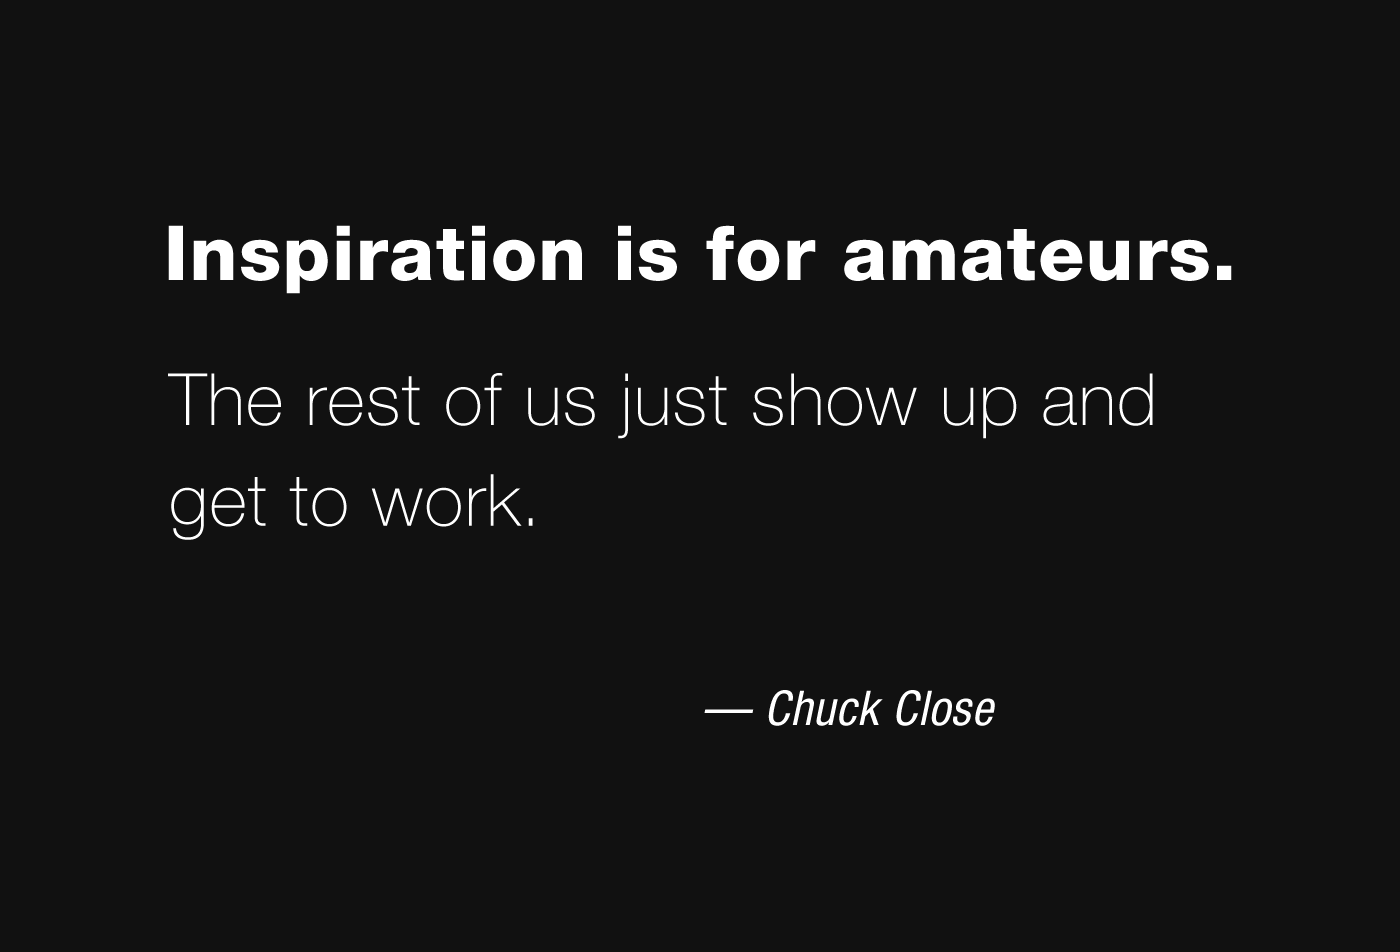 Inspiration is for amateurs - the rest of us just show up and get to work - Chuck Close.